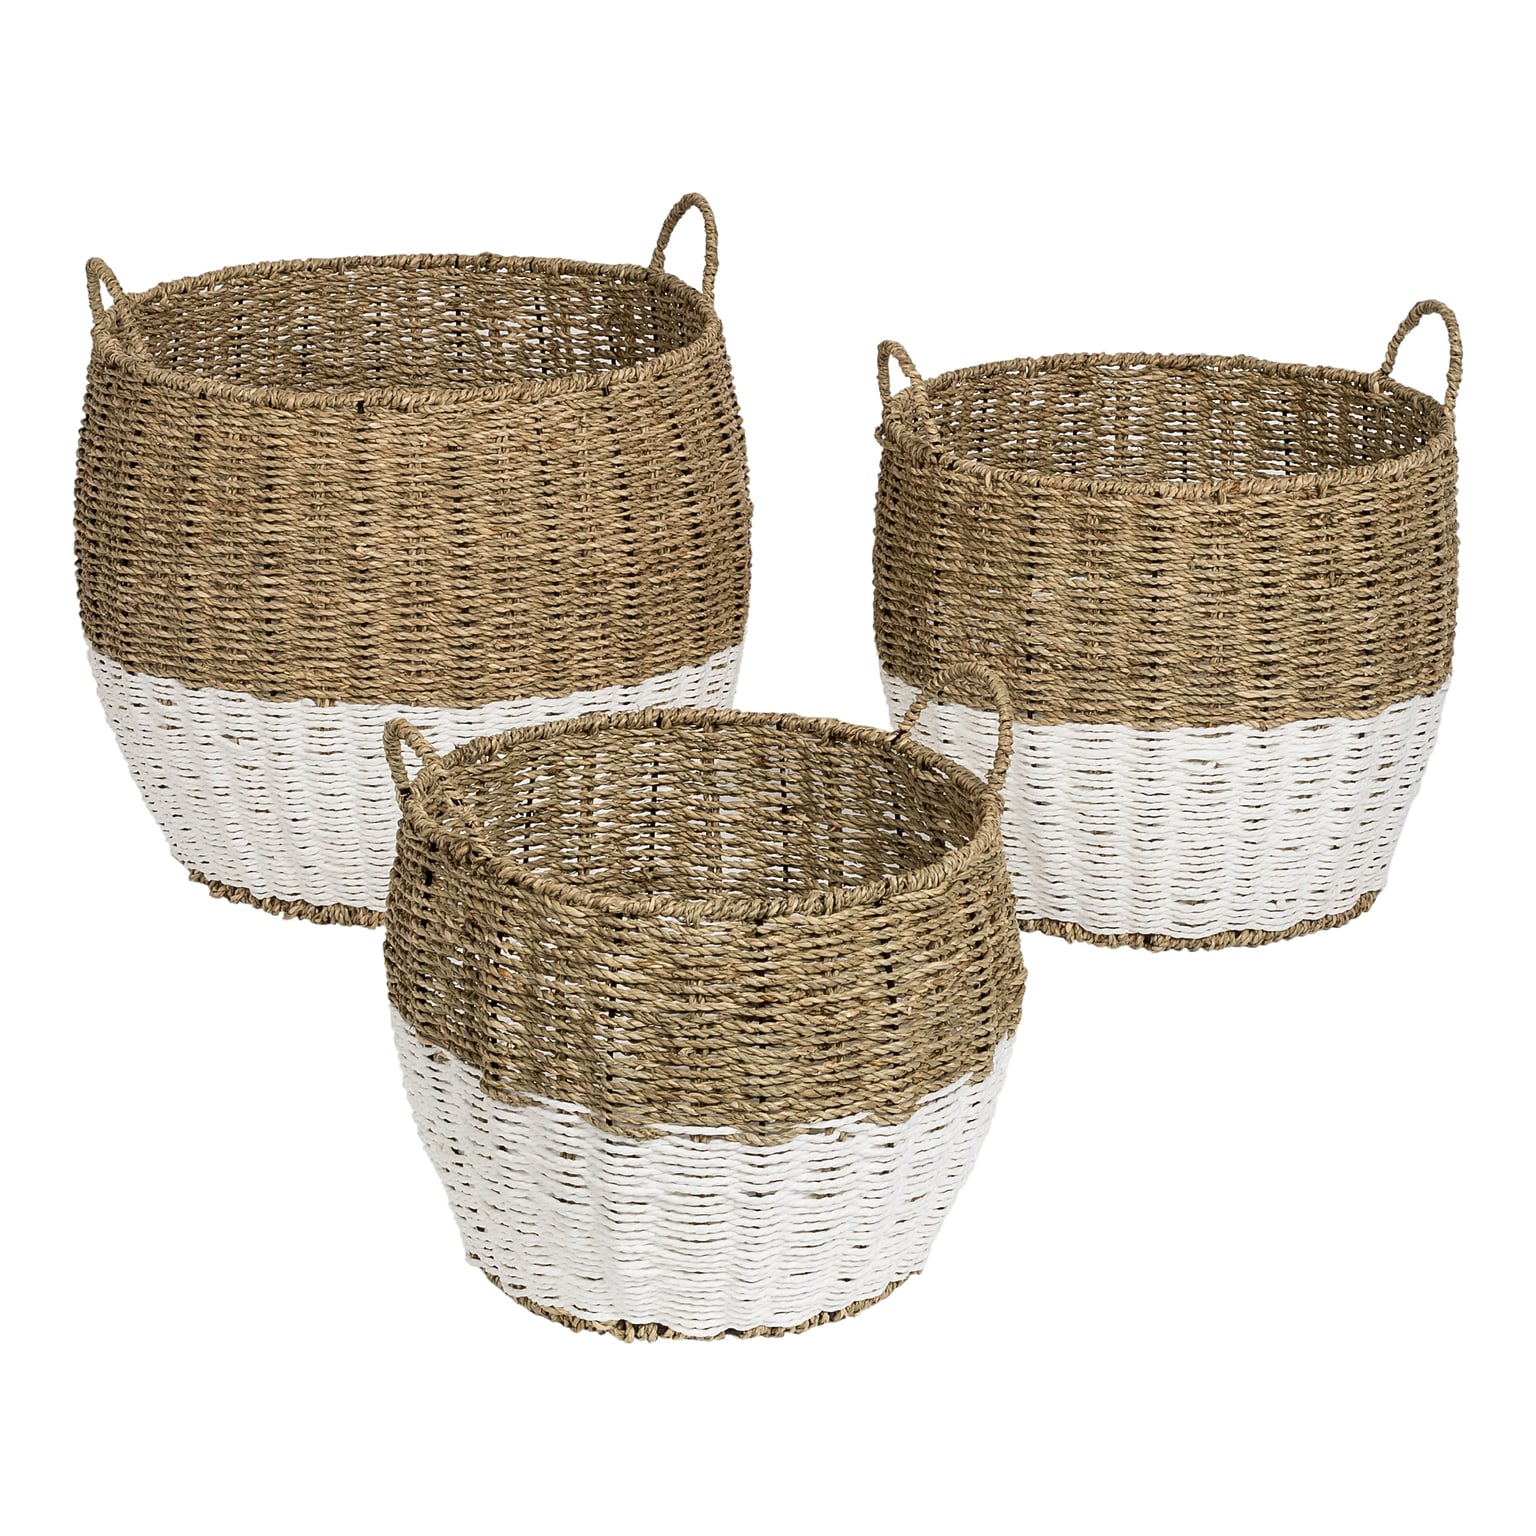 Honey-Can-Do Baskets with Handles, Nesting, Brown/White, 3/Set (STO-08399)